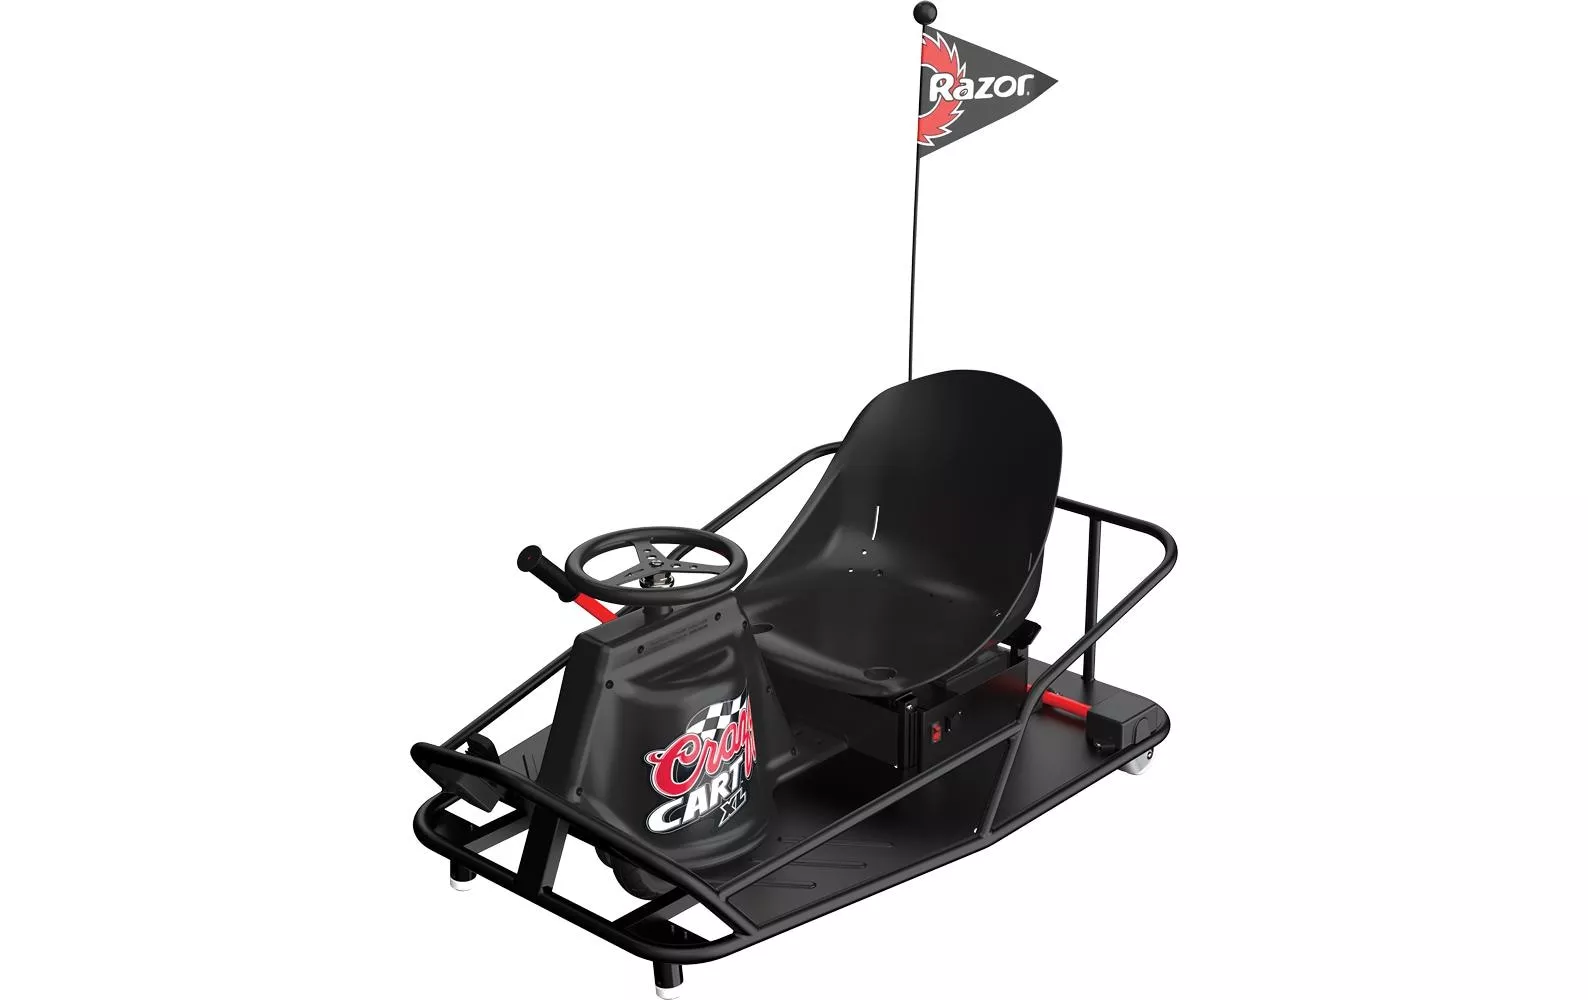 Electric Ride-on Crazy Cart XL